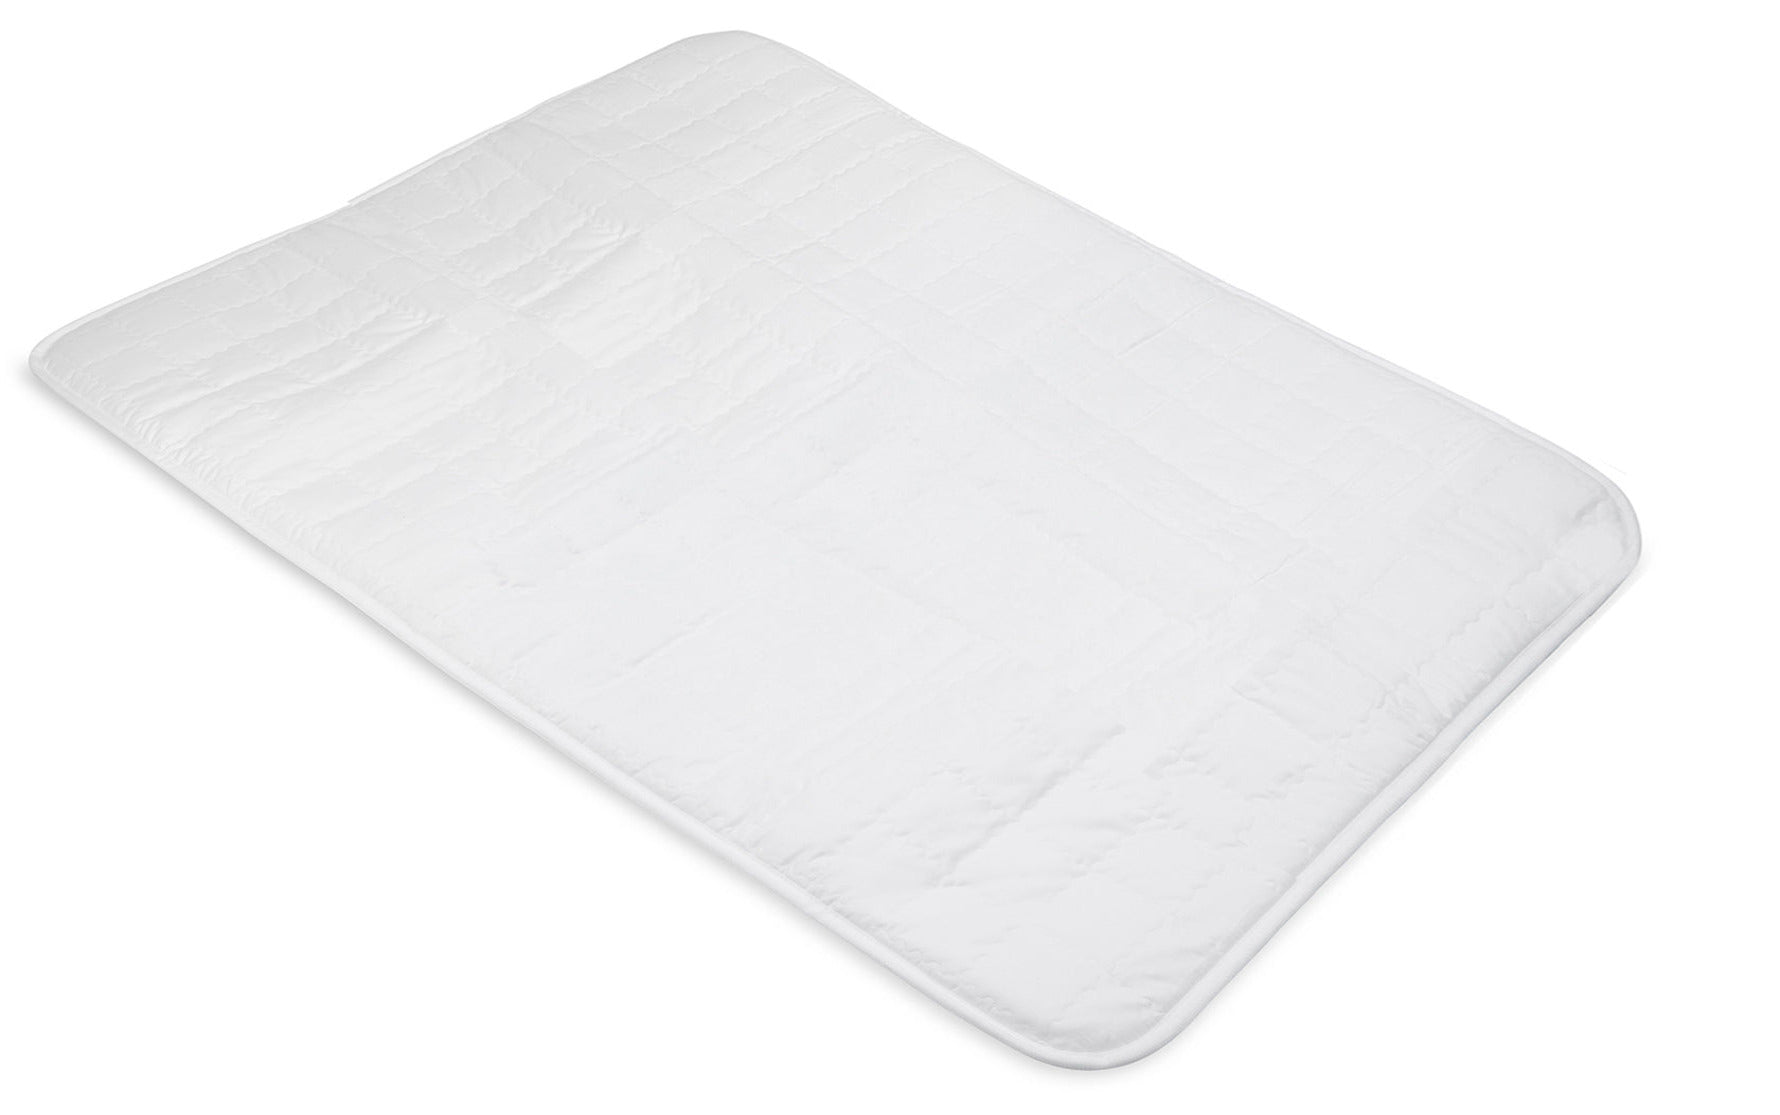 NEW Advanced Sleeptek 2.0 Mat- NO EMF - Double - For Pain Relief, Deeper Longer Sleep, Improved Cognitive Function & Increased Energy